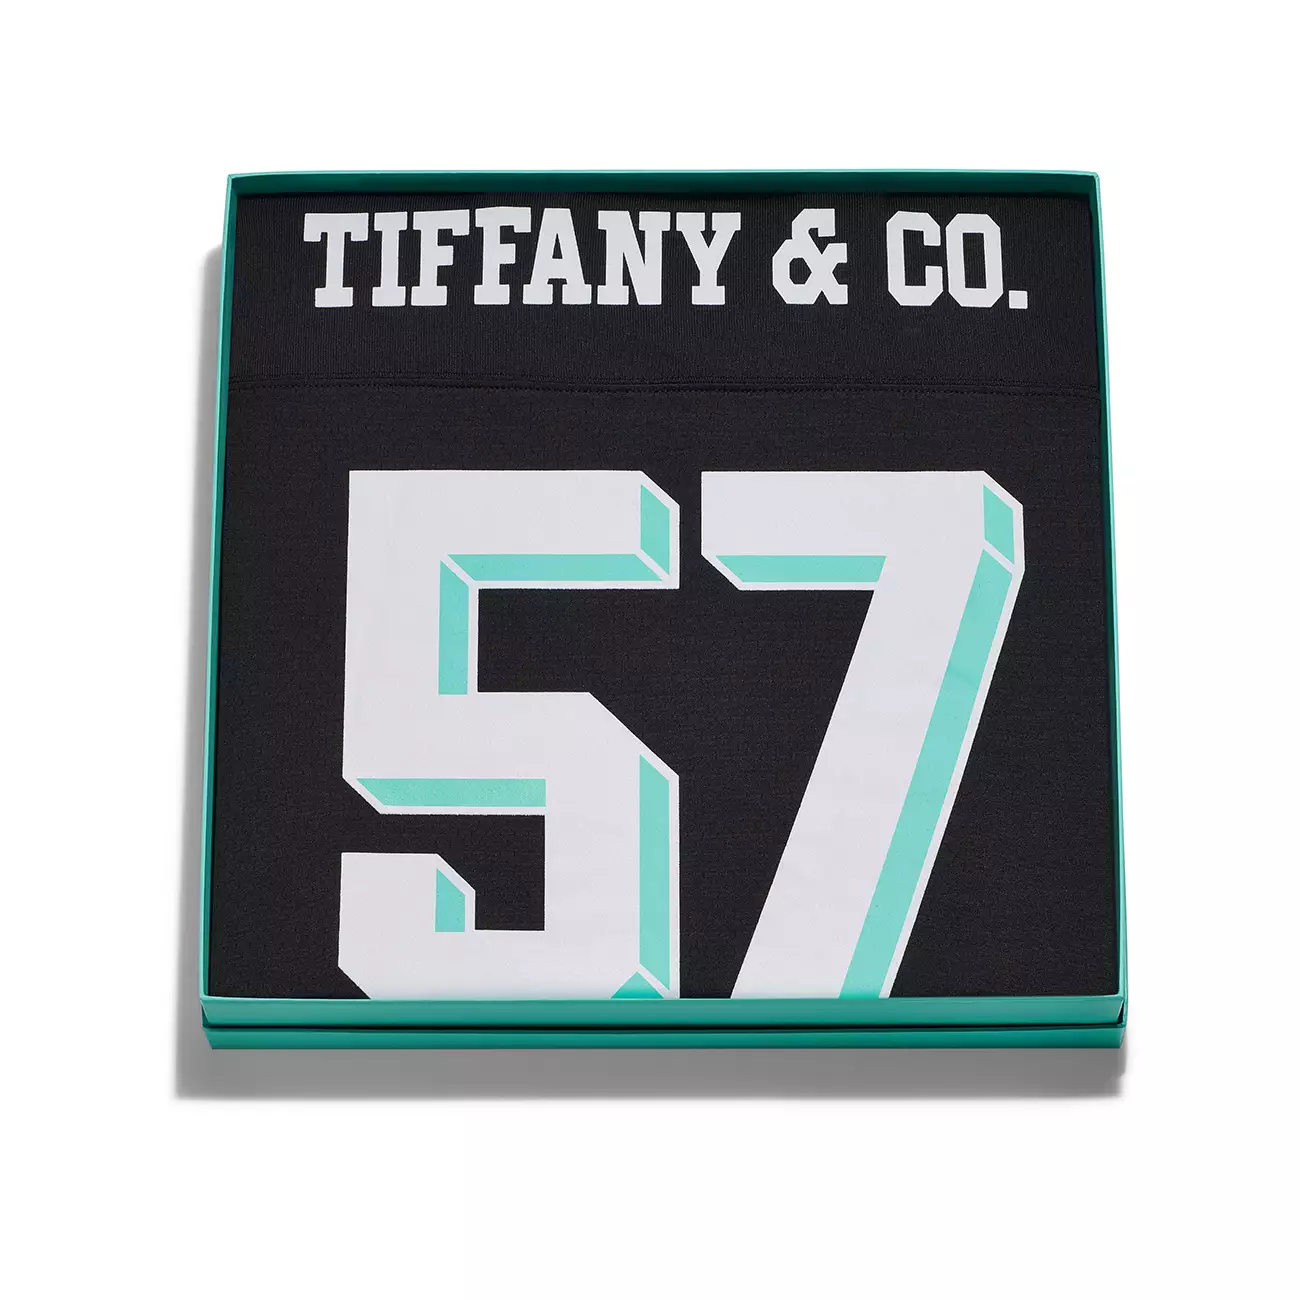 Tiffany & Co. expands influence into fashion with Mitchell & Ness collaboration on Super Bowl jersey